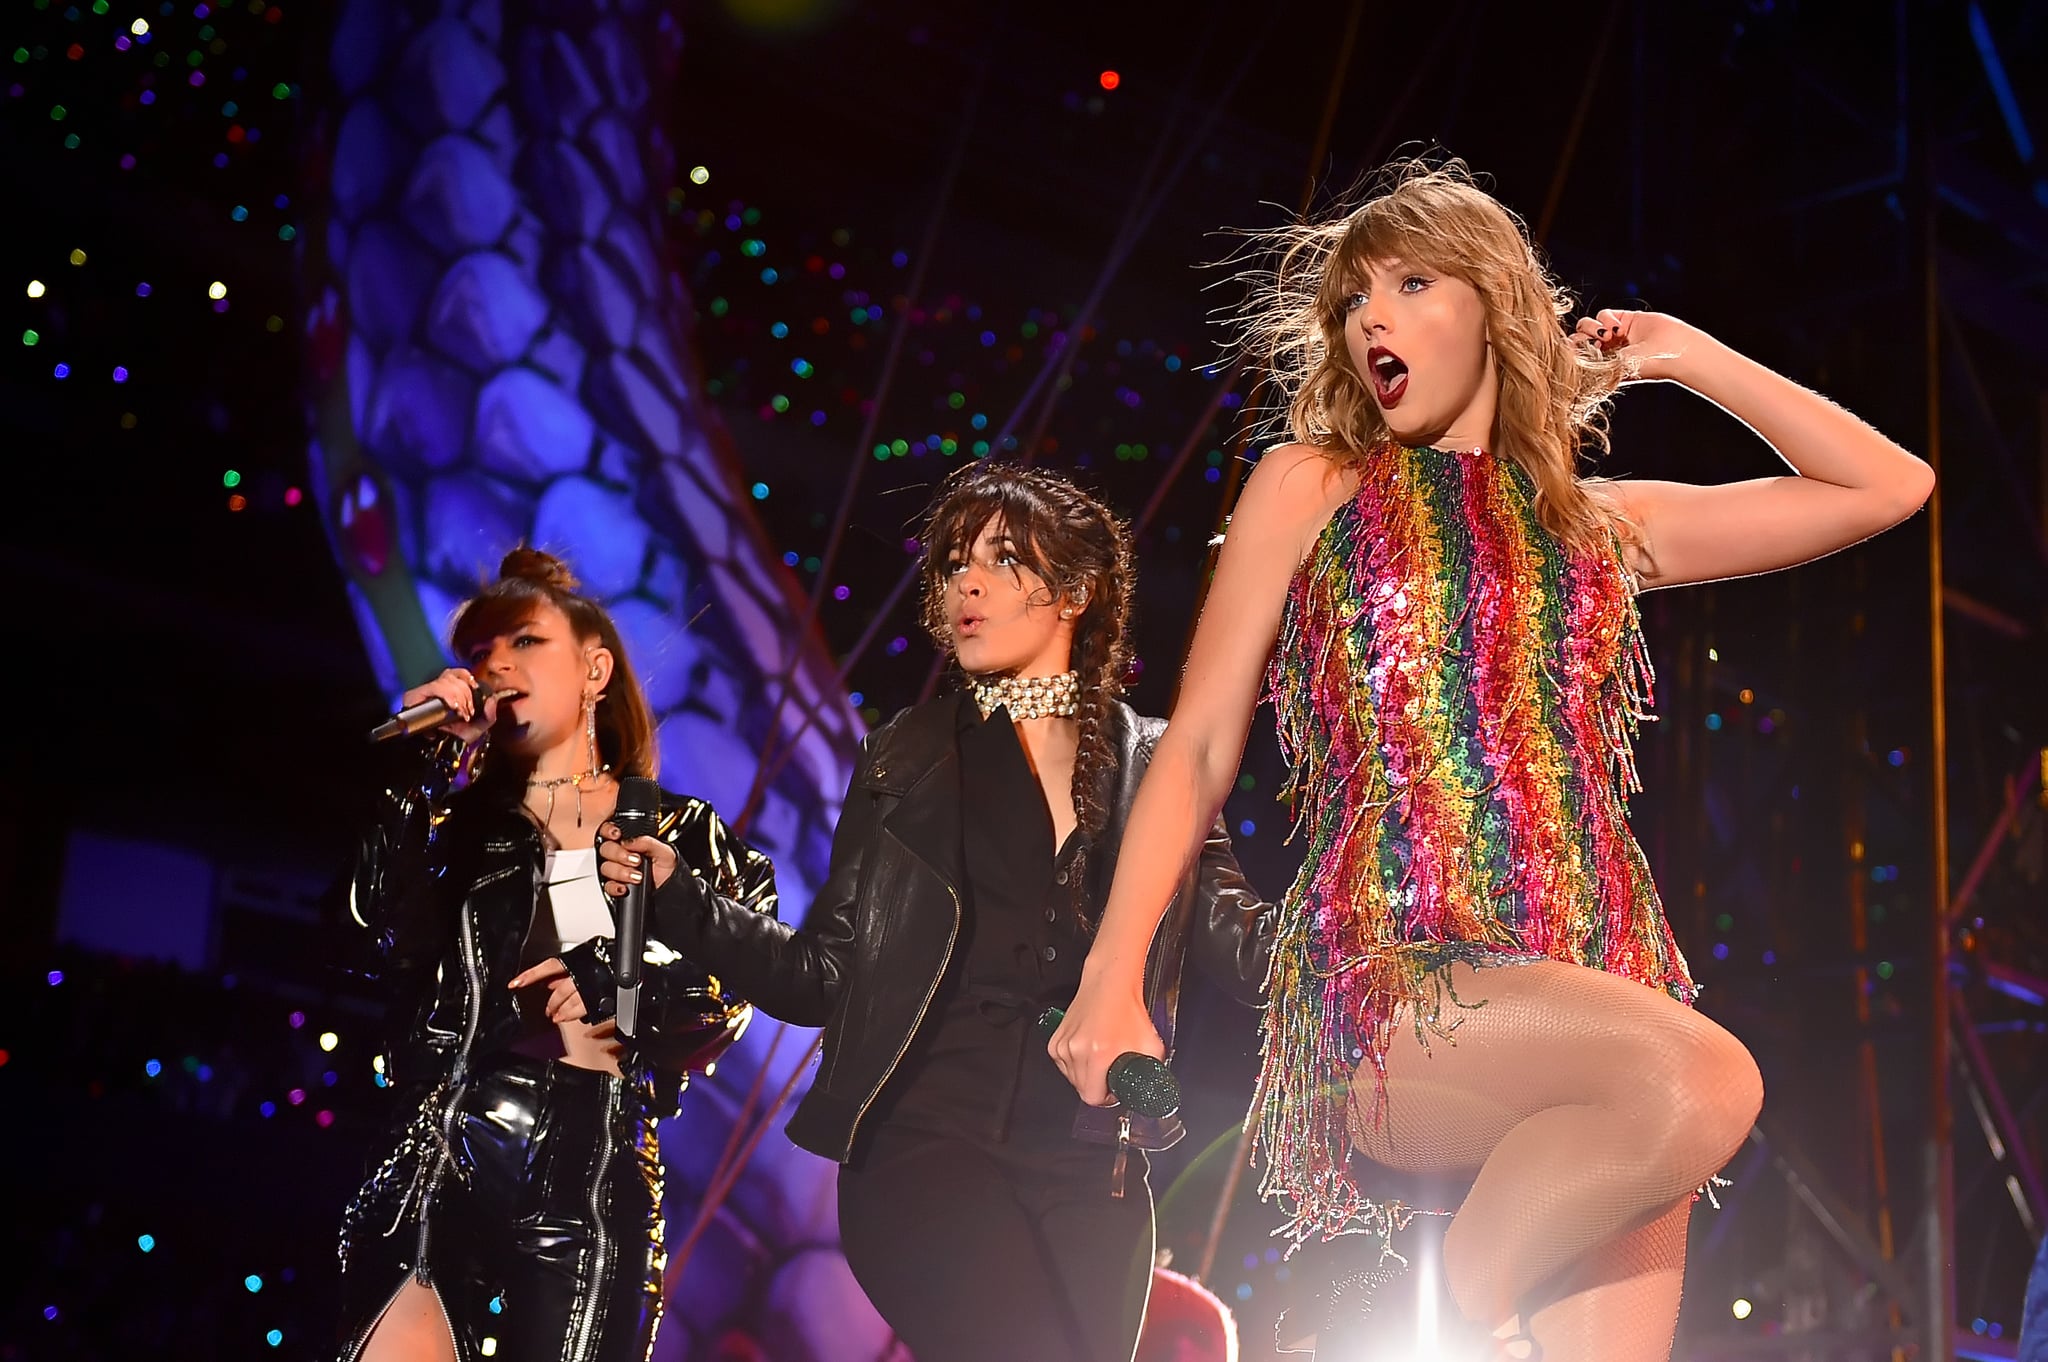 CHICAGO, IL - JUNE 01:  (L-R) Charli XCX, Camila Cabello, and Taylor Swift perform onstage during the 2018 reputation Stadium Tour at Soldier Field on June 1, 2018 in Chicago, Illinois.  (Photo by John Shearer/TAS18/Getty Images)